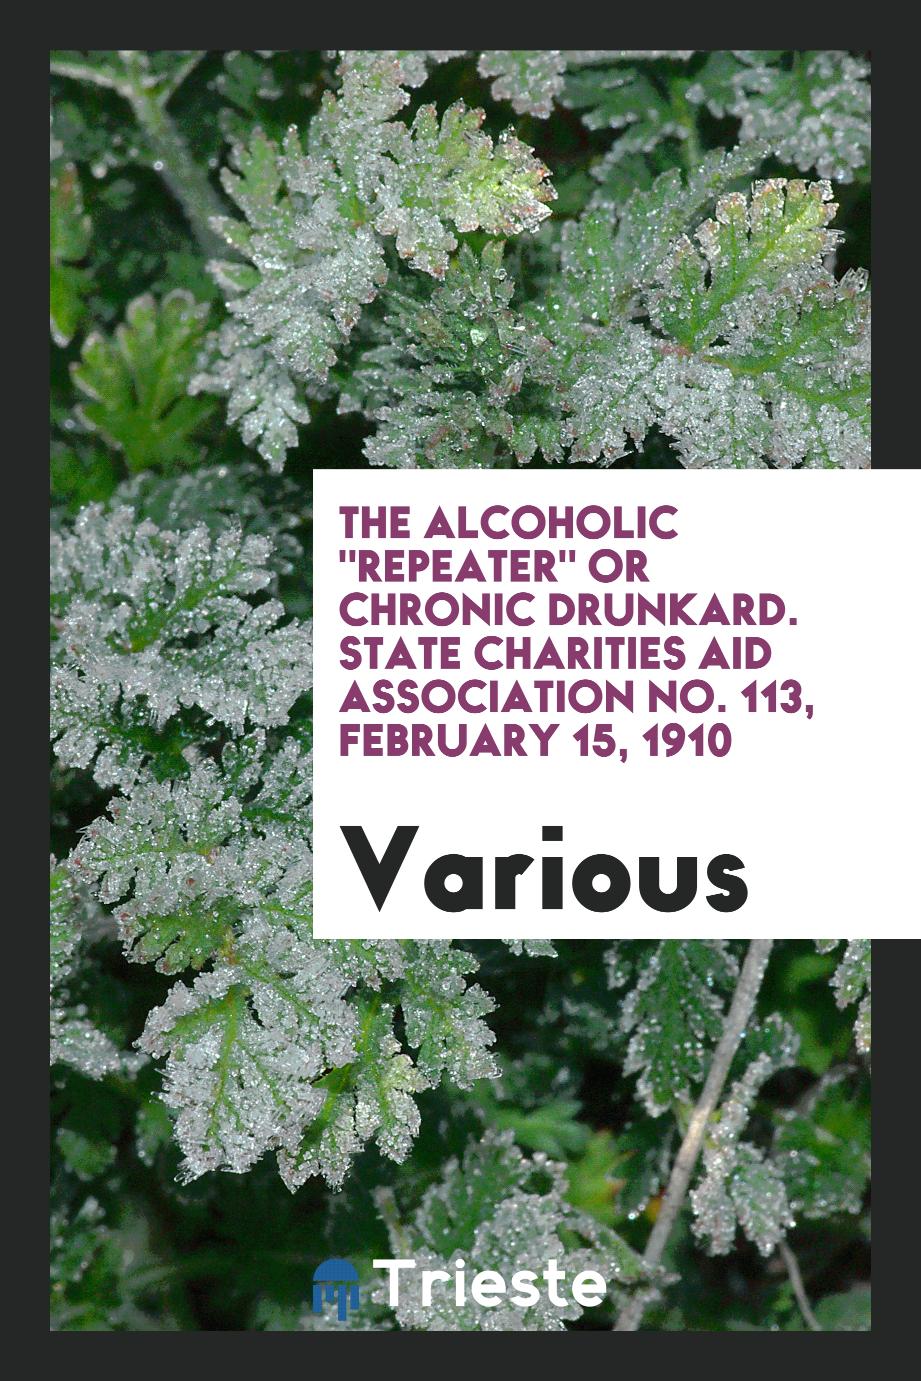 The Alcoholic "repeater" Or Chronic Drunkard. State Charities Aid Association No. 113, February 15, 1910